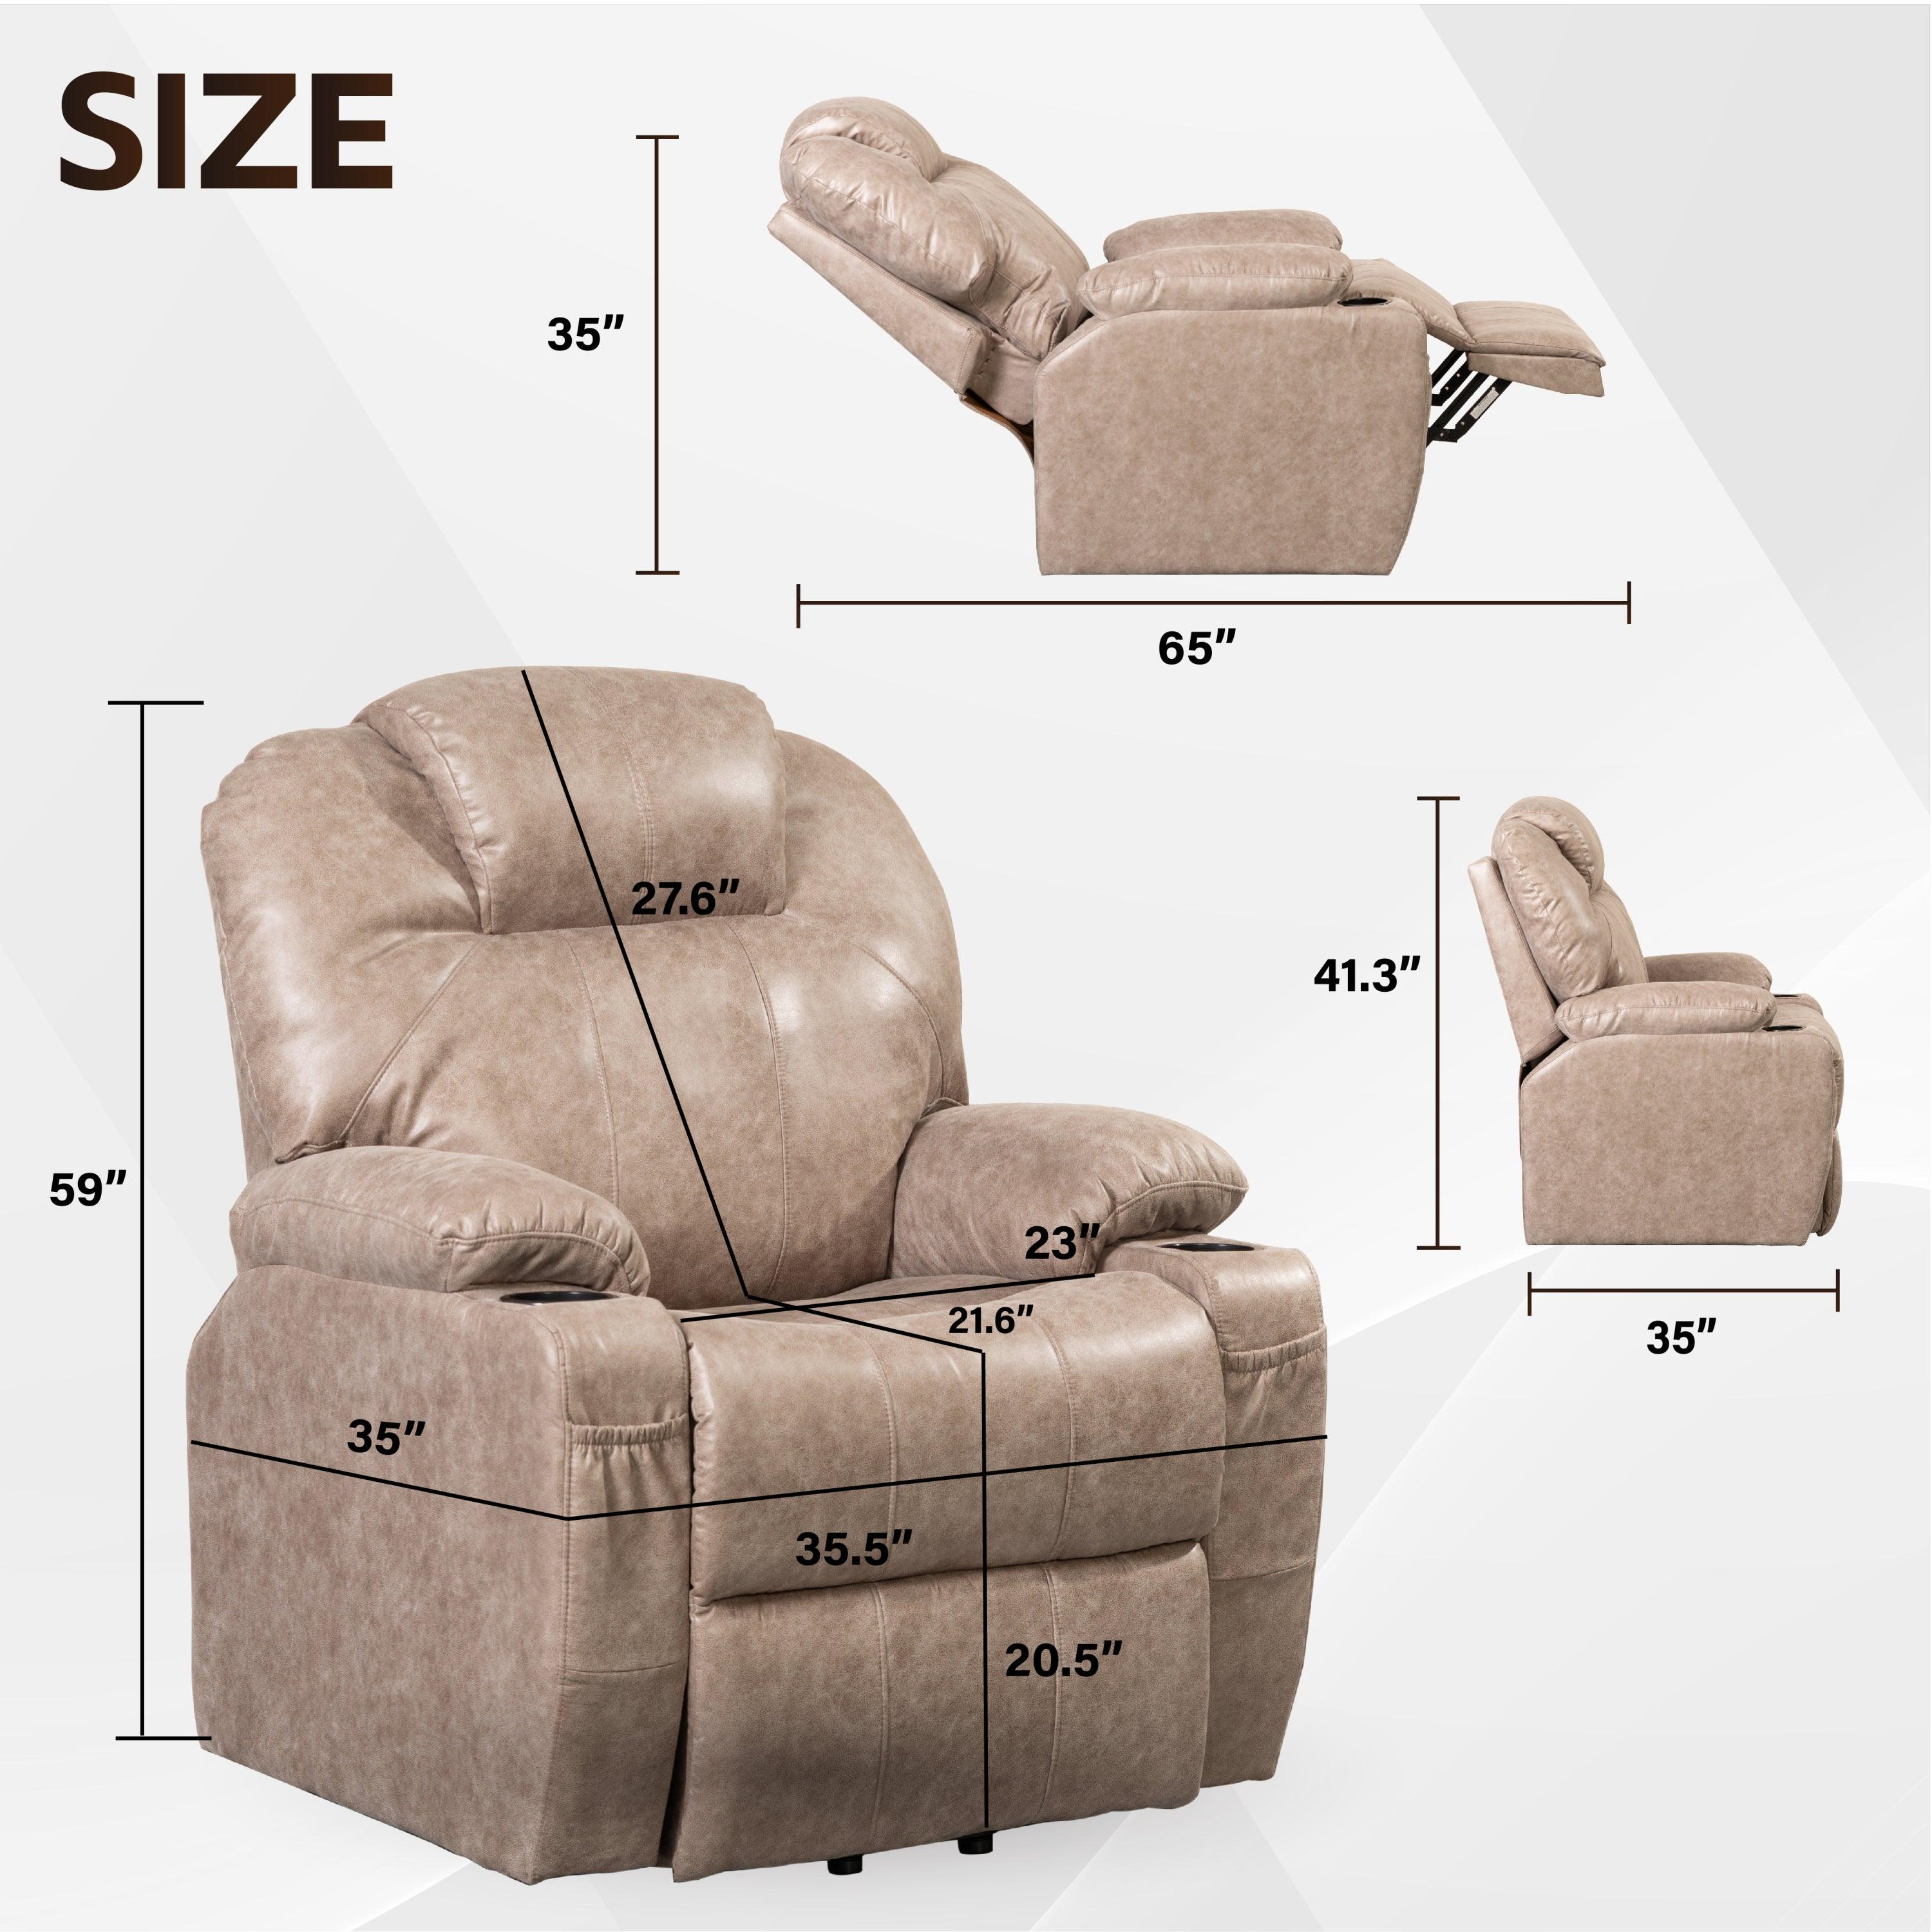 Beige Lift Chair Recliner with massage and heat, dimensions